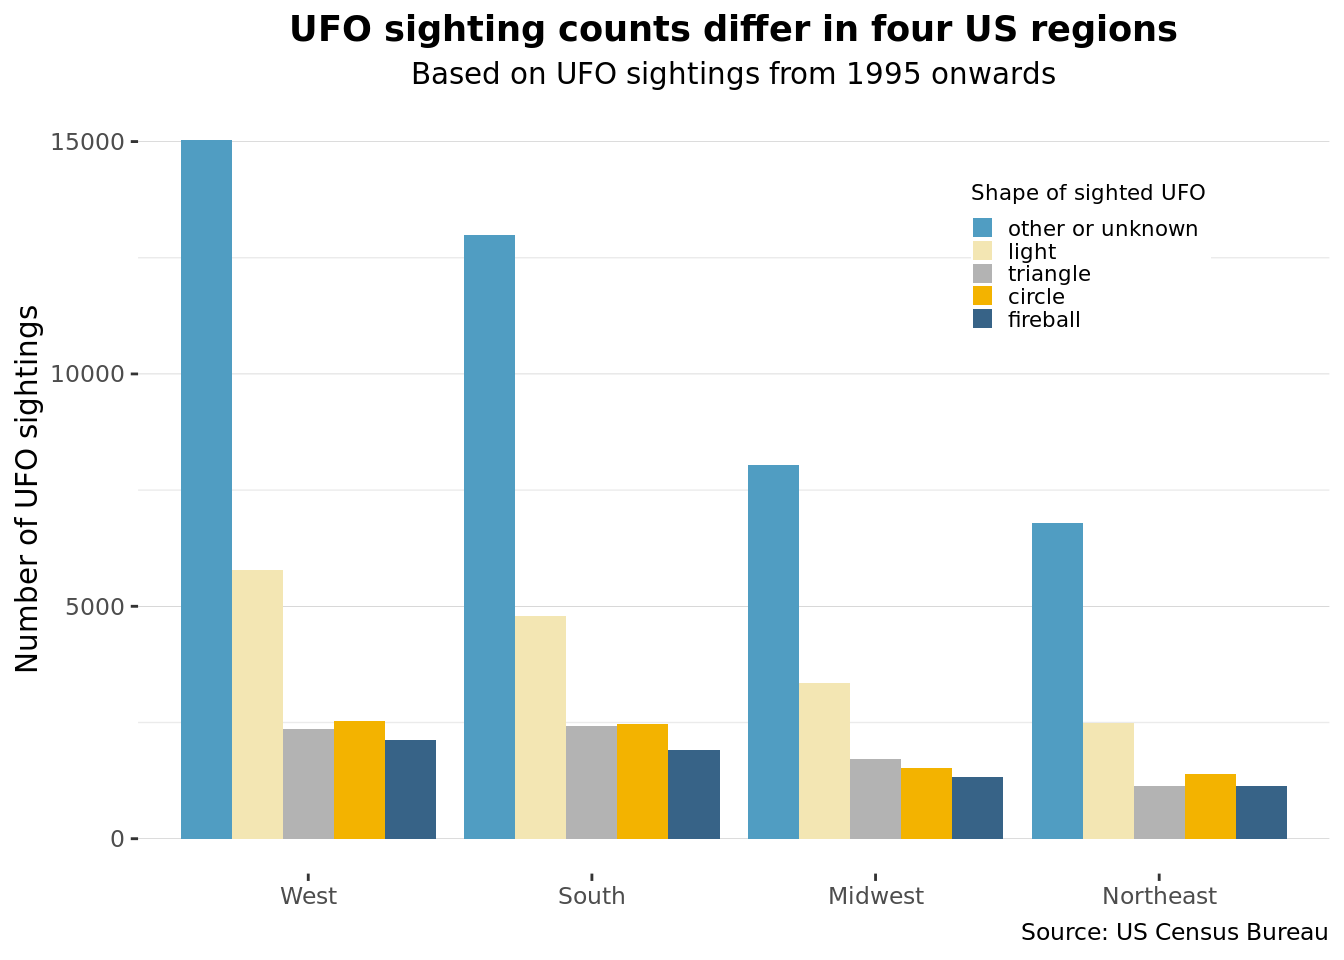 A grouped bar plot, grouped by the four US geographical regions. The y-axis corresponds to the number of UFO sightings from US since 1995. The x-axis corrsponds to the categorical variable region. The bars in the plot has different colors that correspond to the five most common types of shapes of the UFOs reported. The number of UFO sightings is highest overall in the West --- with a total of over 25000 sightings, followed by the South, the Midwest, and Northeast, the last of which has only approximately 12500 sightings. The highest number by shape is other or unknown, which accounts for approximately 15000 of sightings in the West region, over 12500 sightings in the South region, over 7500 sightings in the Midwest, and approximately 6500 sightings in the Northeast. Light, triangle, circle, and fireball are the second, third, fourth, and fifth most common shapes.|